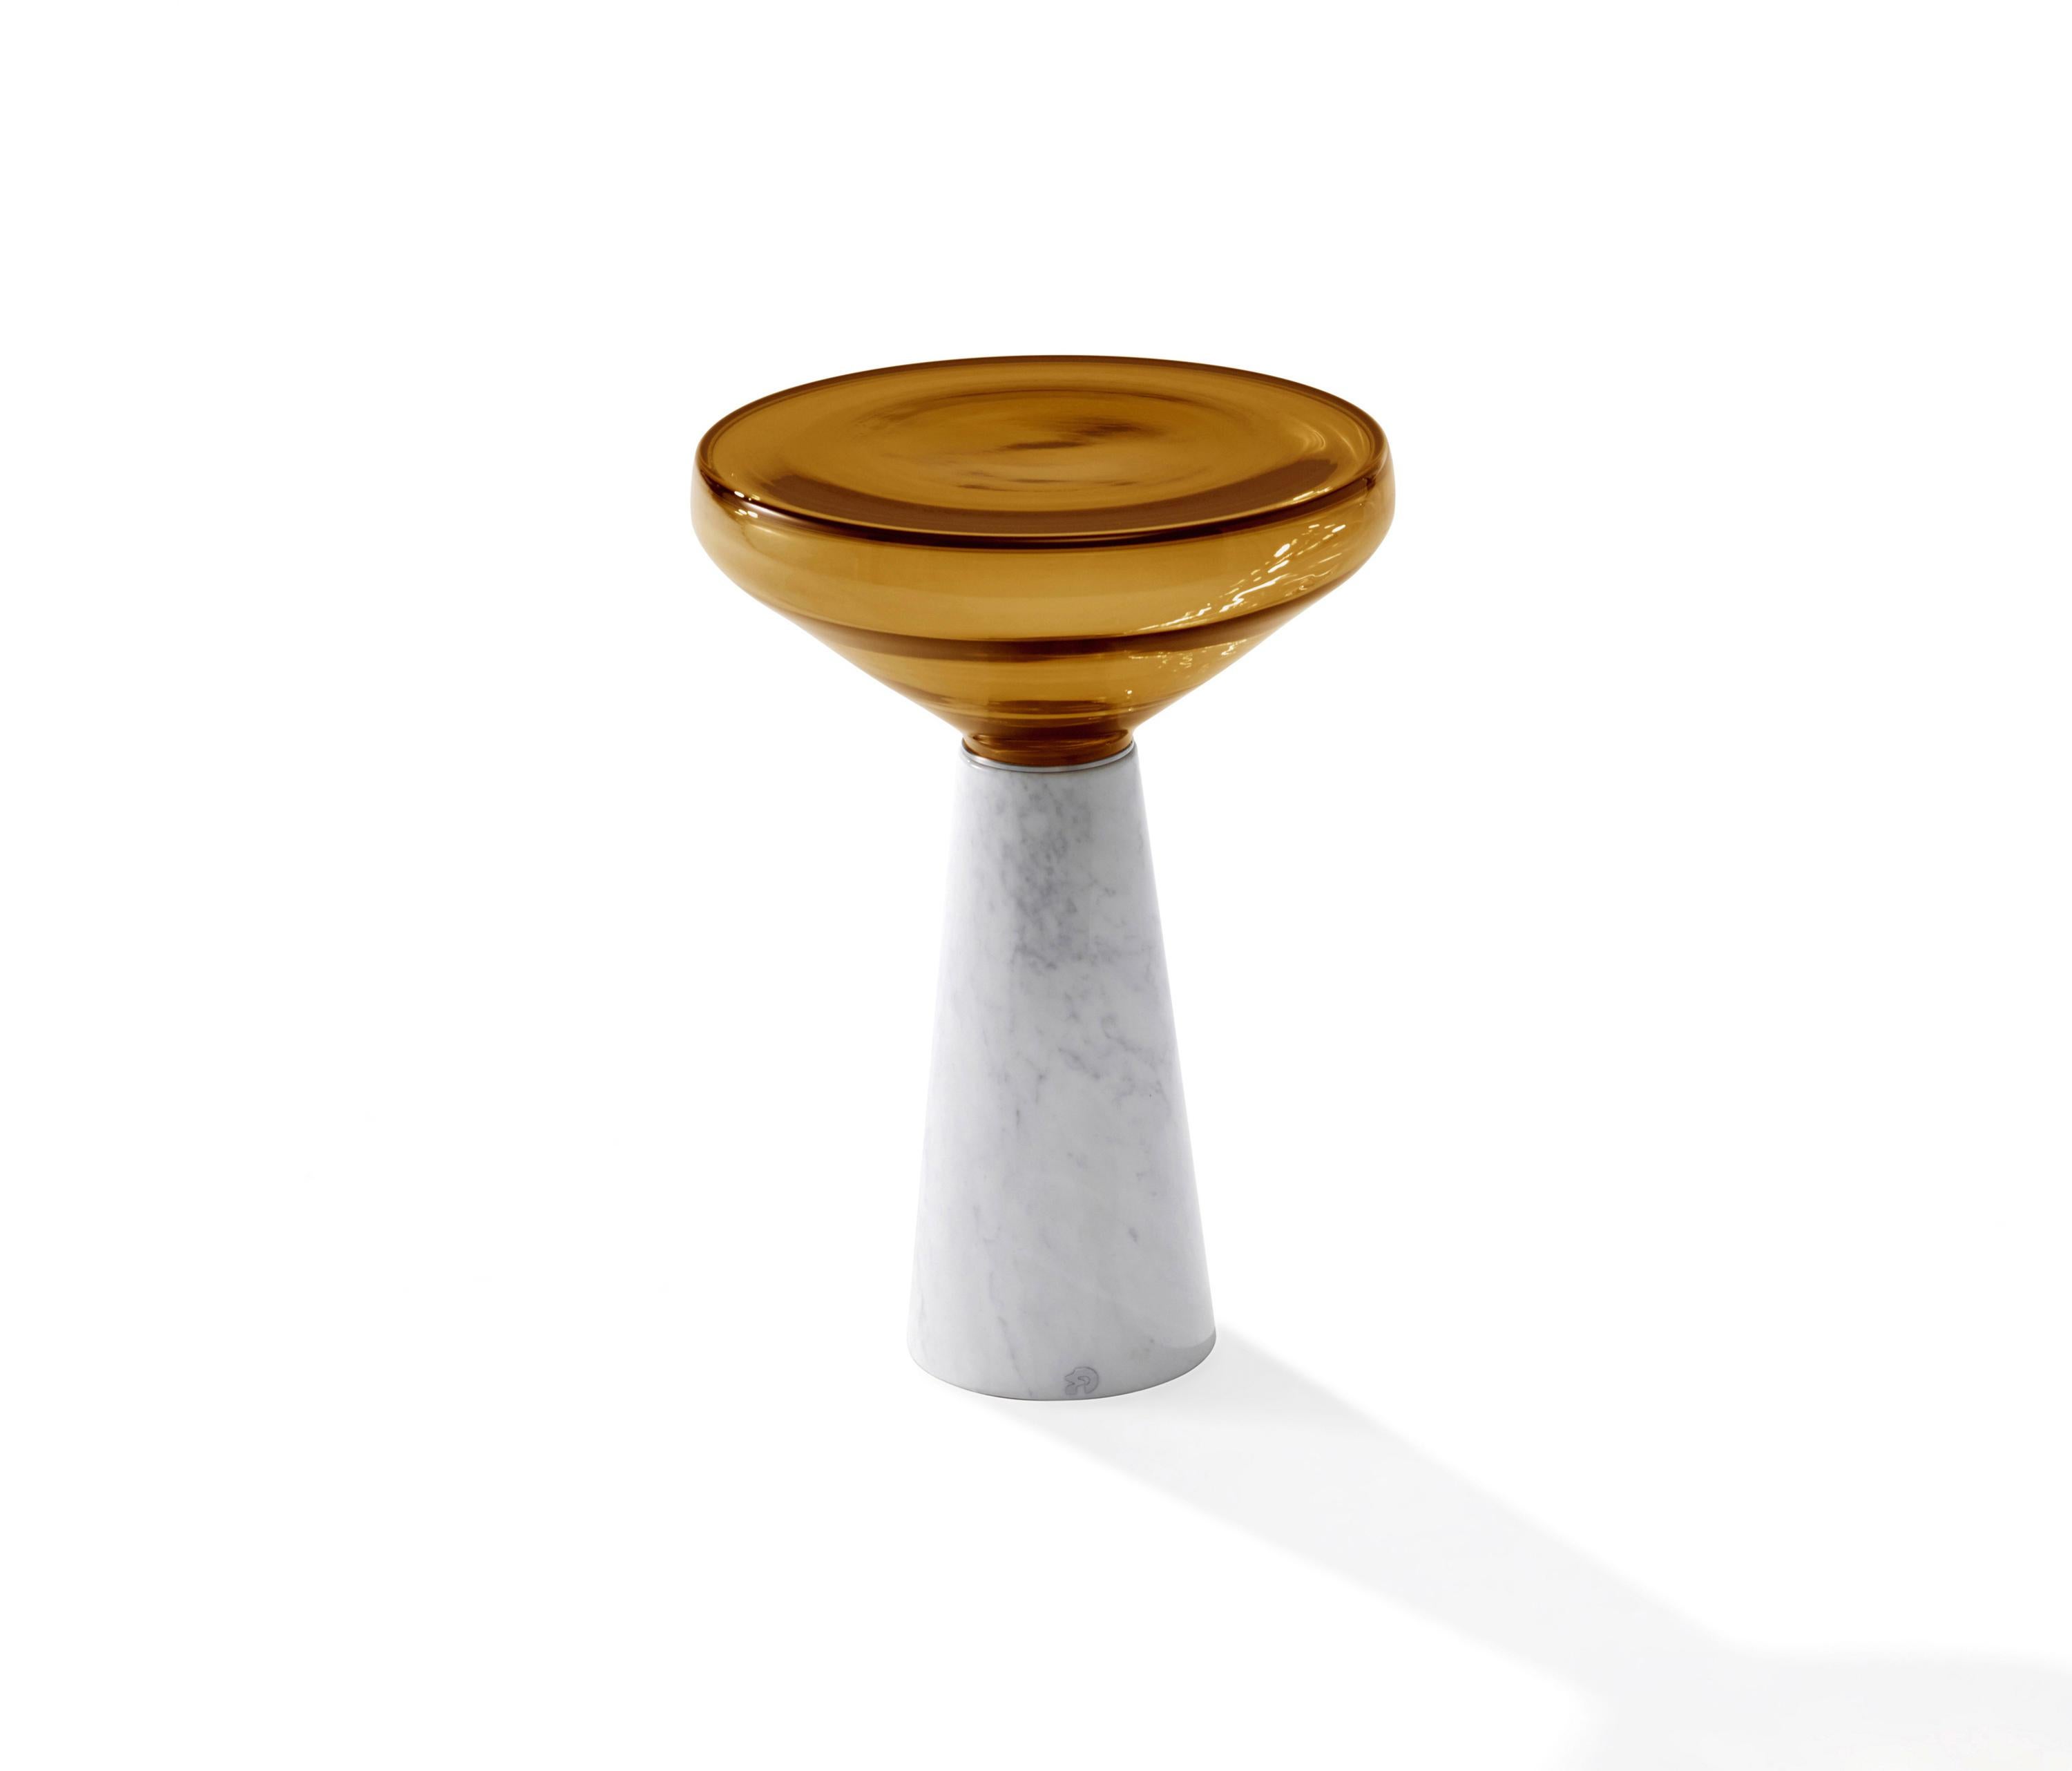 Draenert blow side table designed by Stephan Veit

The Blow side table combines two materials perfectly: stone and glass. The pedestal made of natural stone grounds the table and is the ideal counterpart to the tabletop, made of hand blown glass